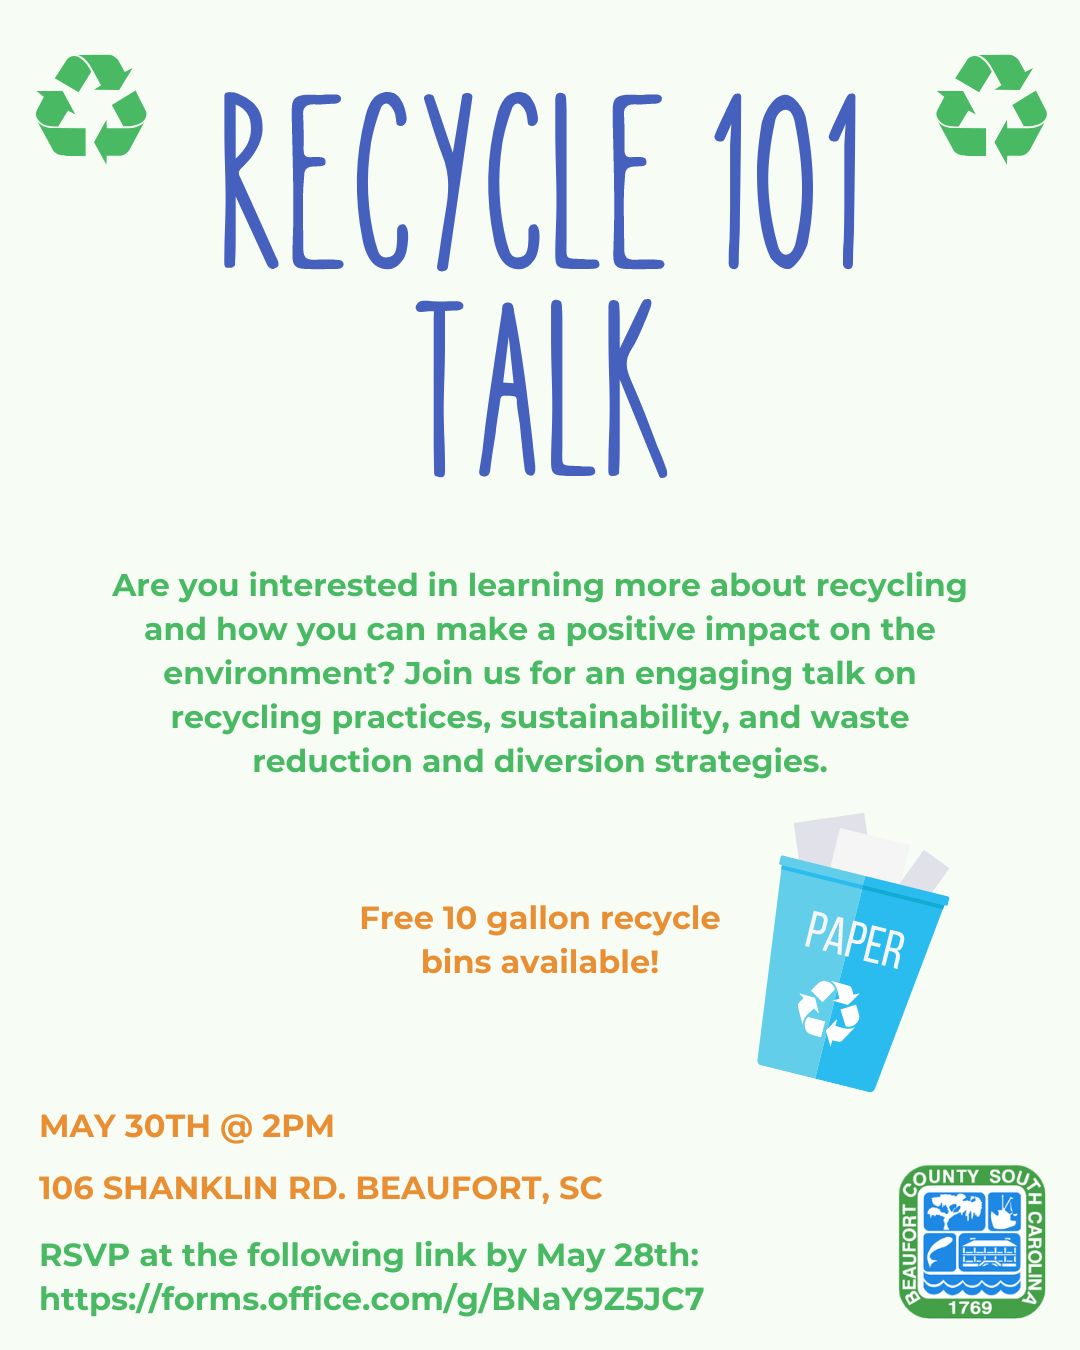 Beaufort County Solid Waste and Recycling to Host Recycle 101 Talk